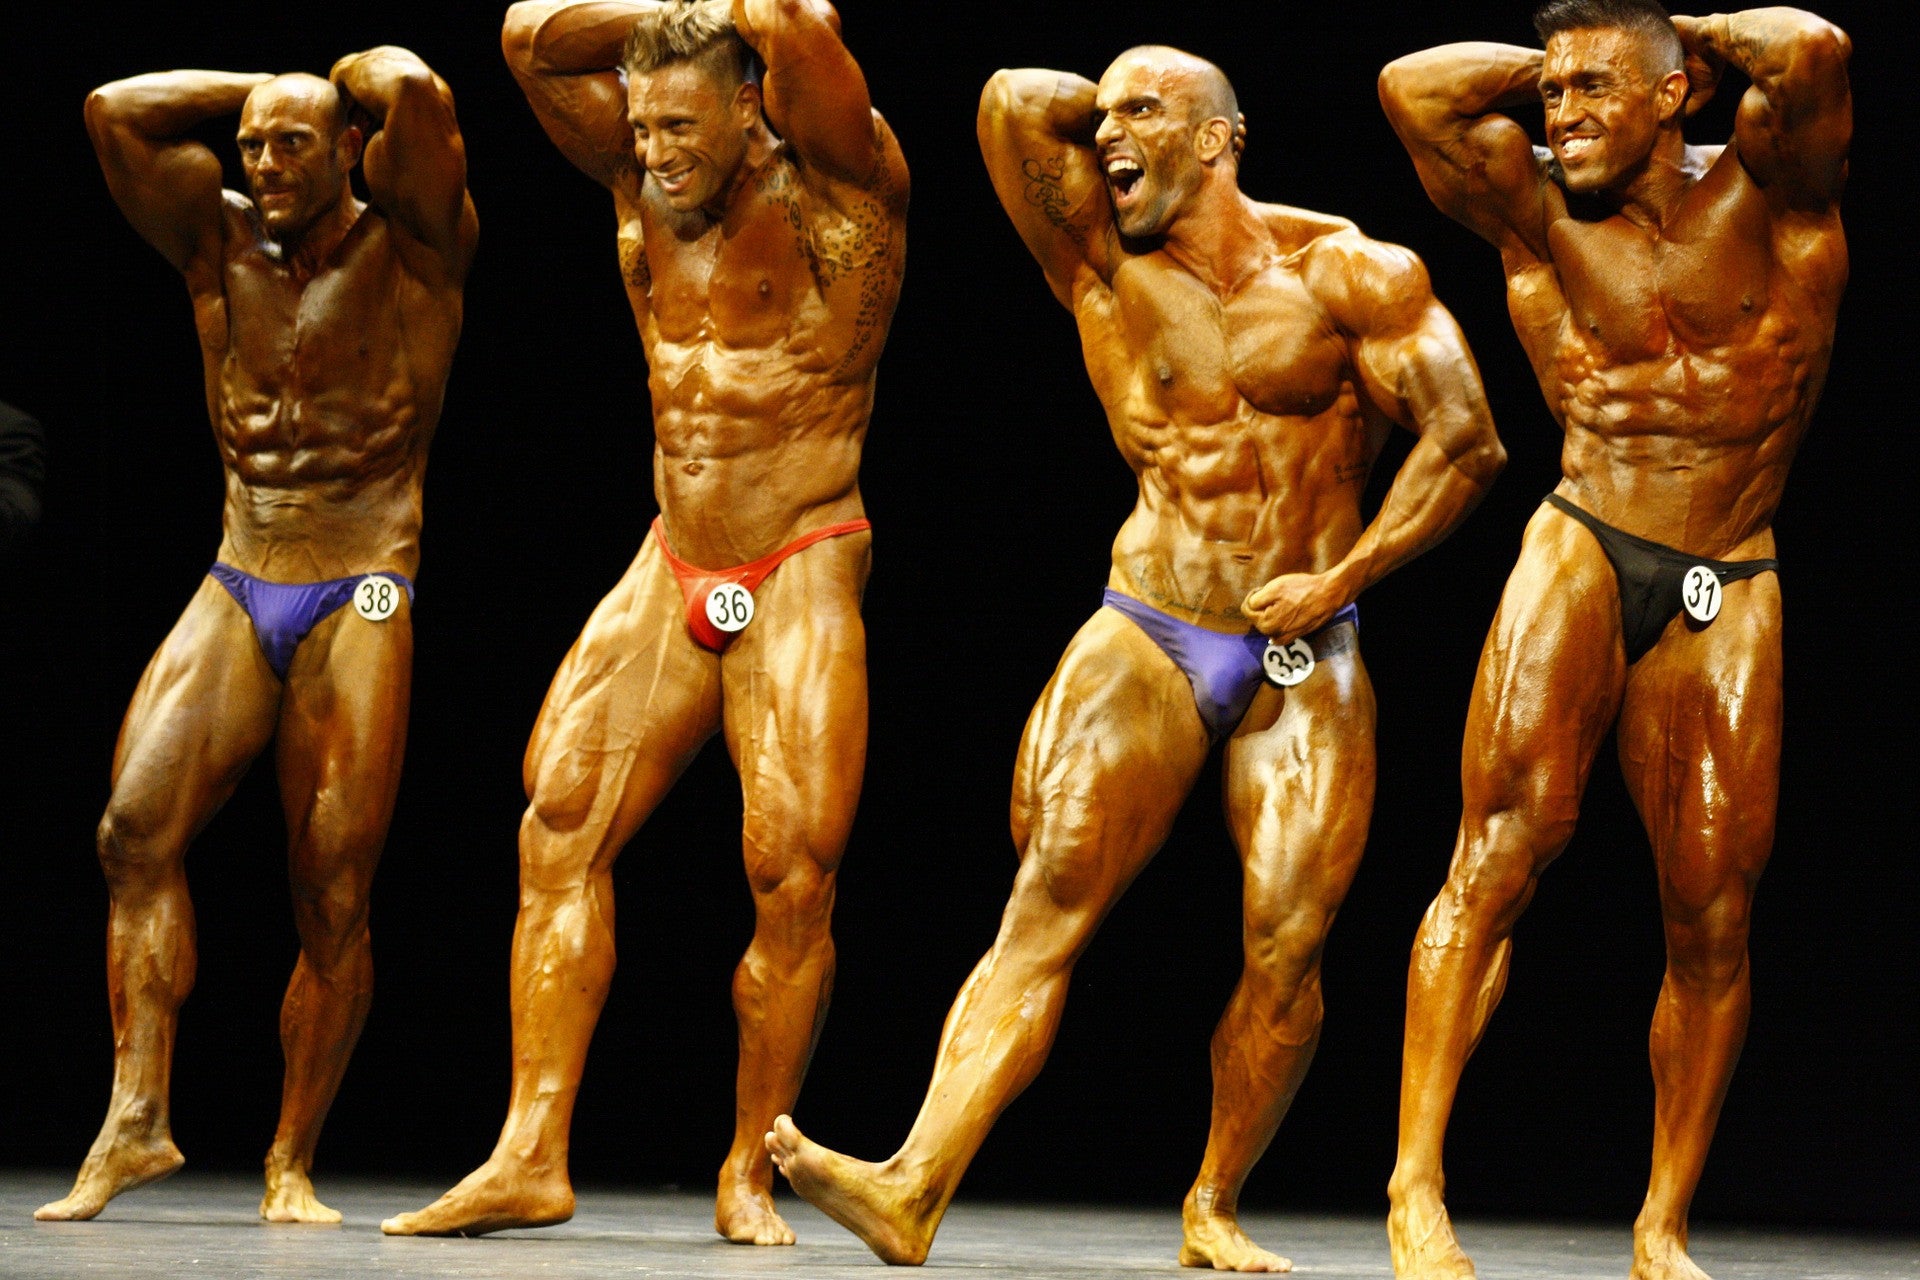 5 Facts You Didn't Know About Mr. Olympia Bodybuilding